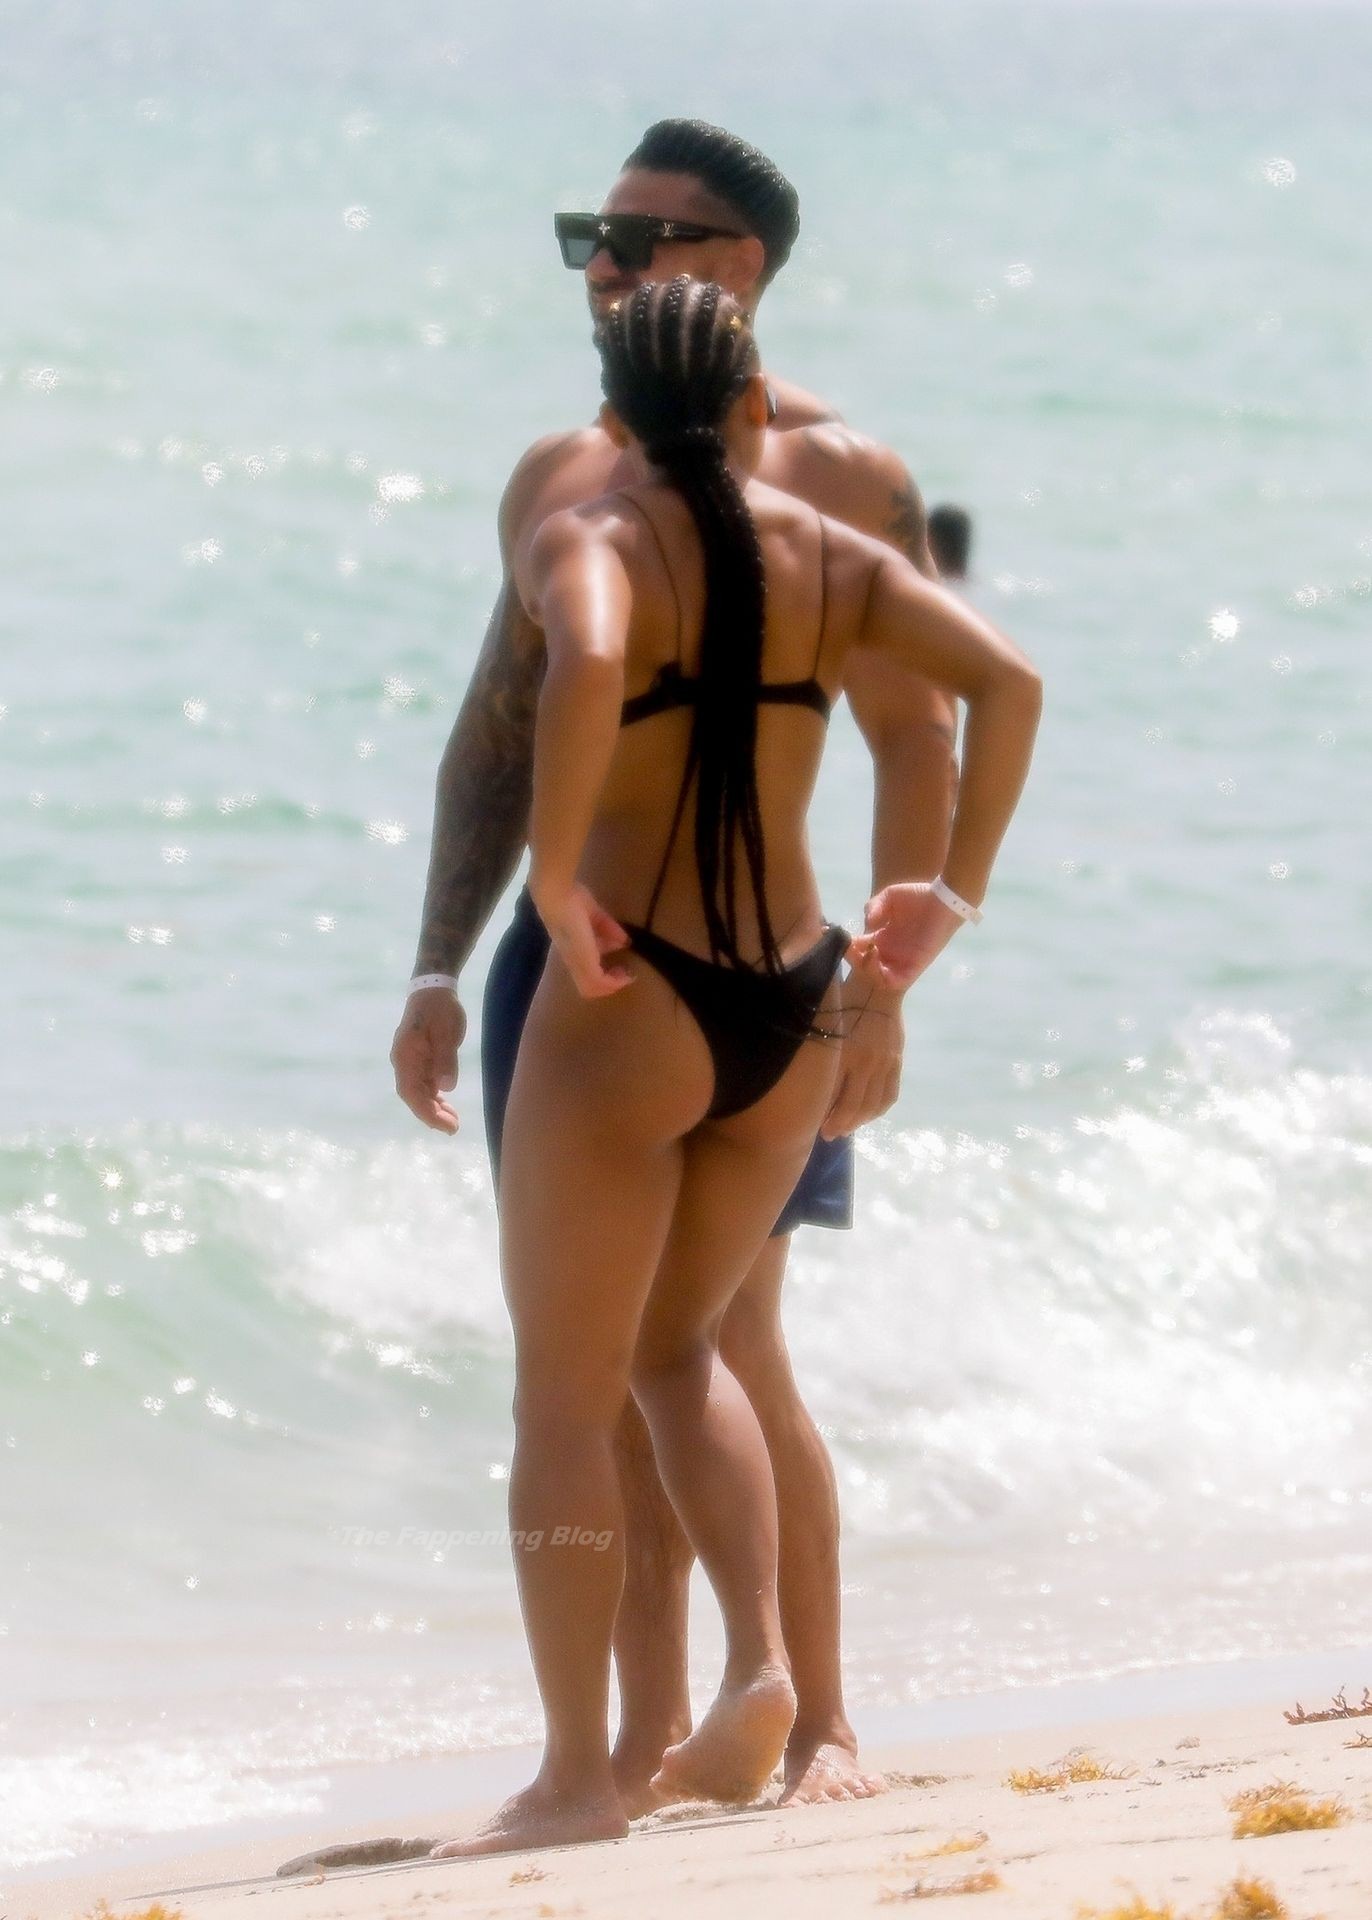 Pauly D & Nikki Hall Works On Their Tans Together in Miami Beach (27 Photos)